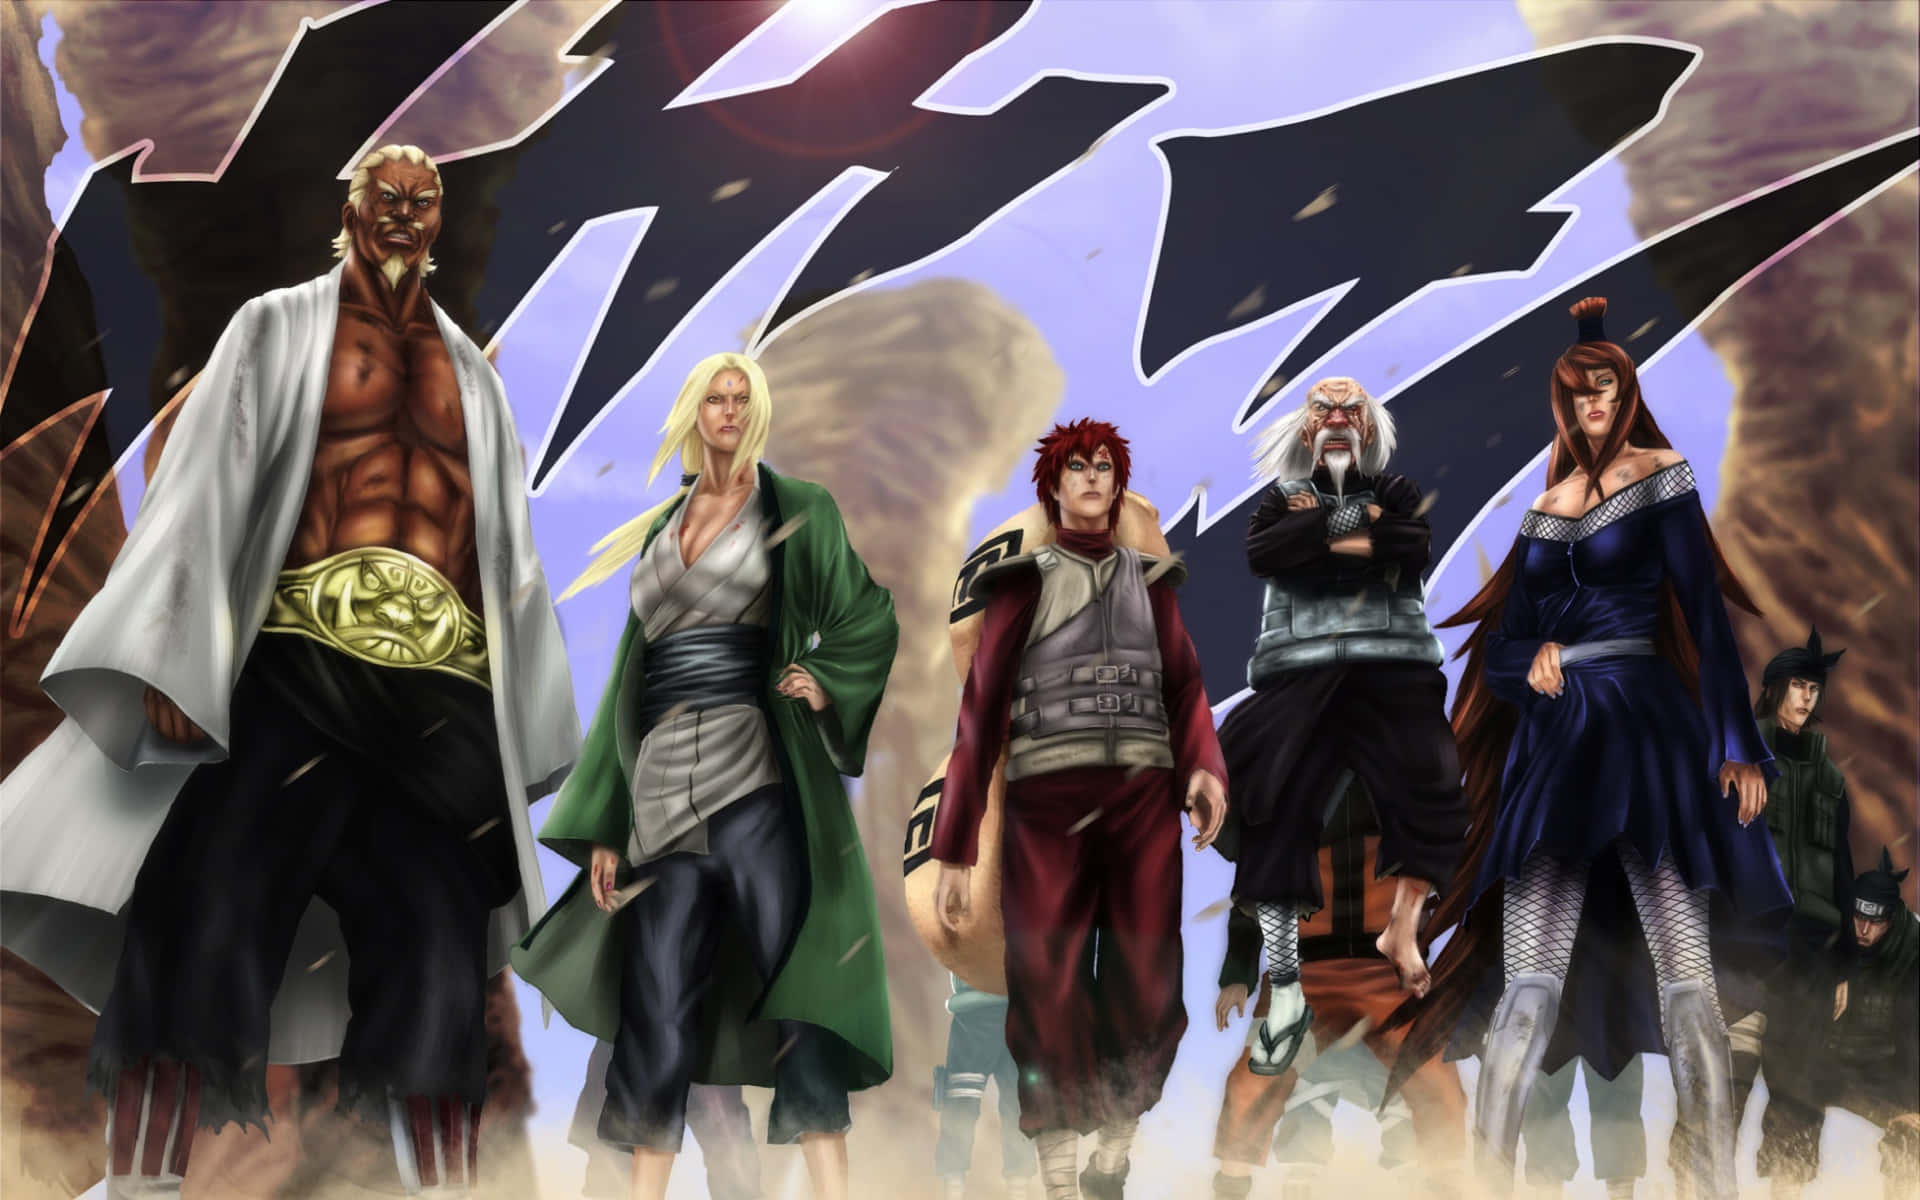 The Legendary Naruto Kage Unleashed Wallpaper